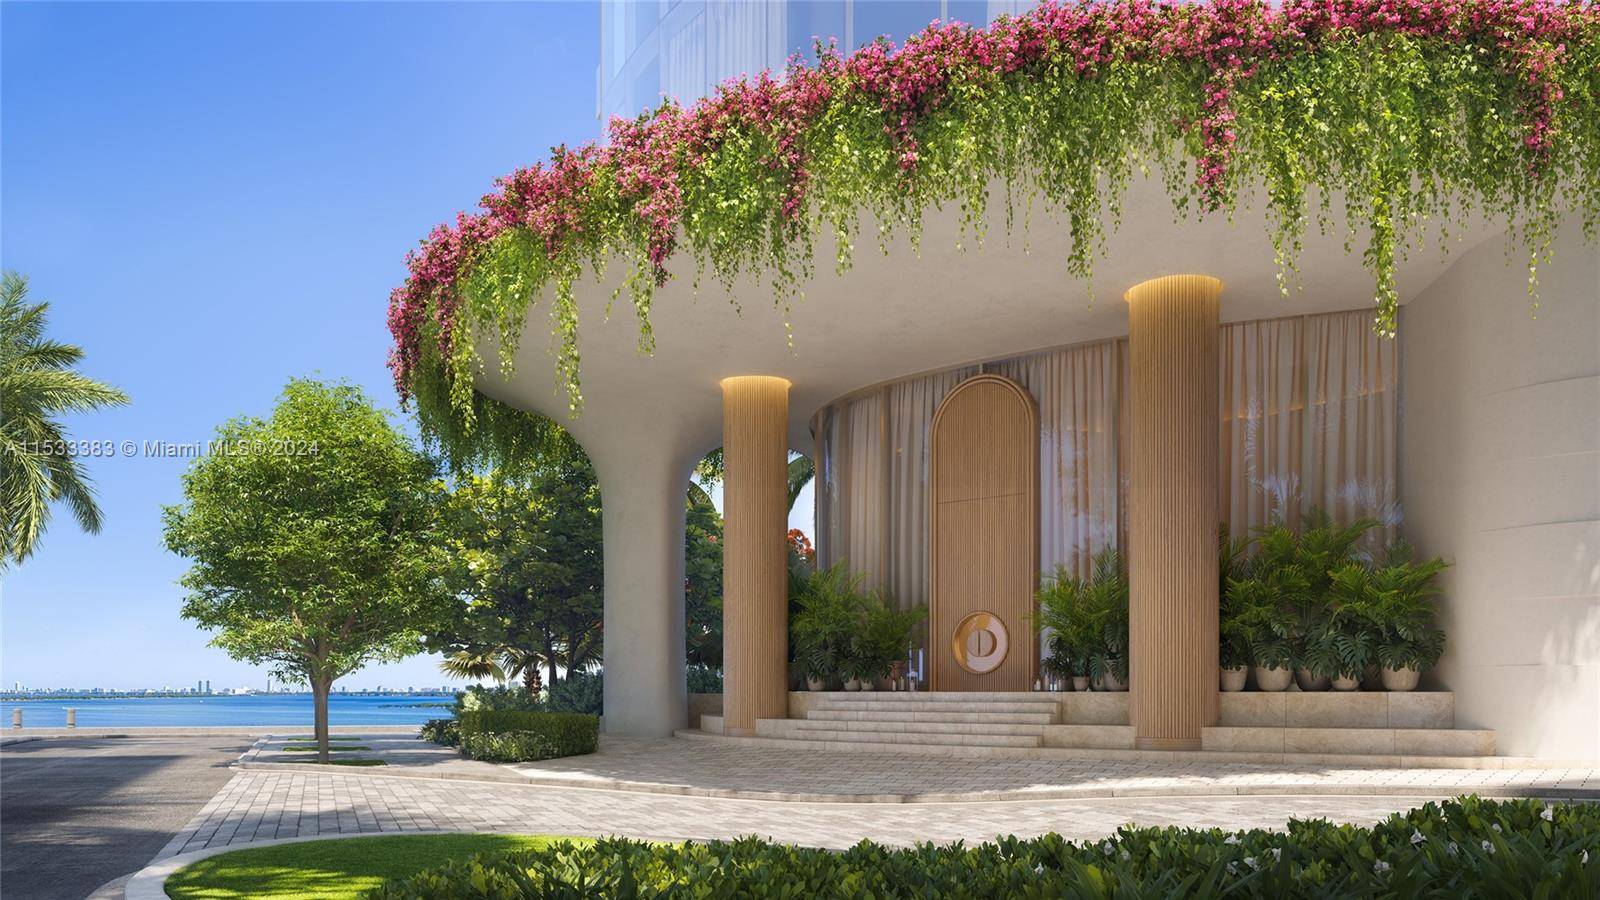 Edition Residences, Miami Edgewater is an ode to Miami and commitment to a new way of living in one of the world's most magical cities.